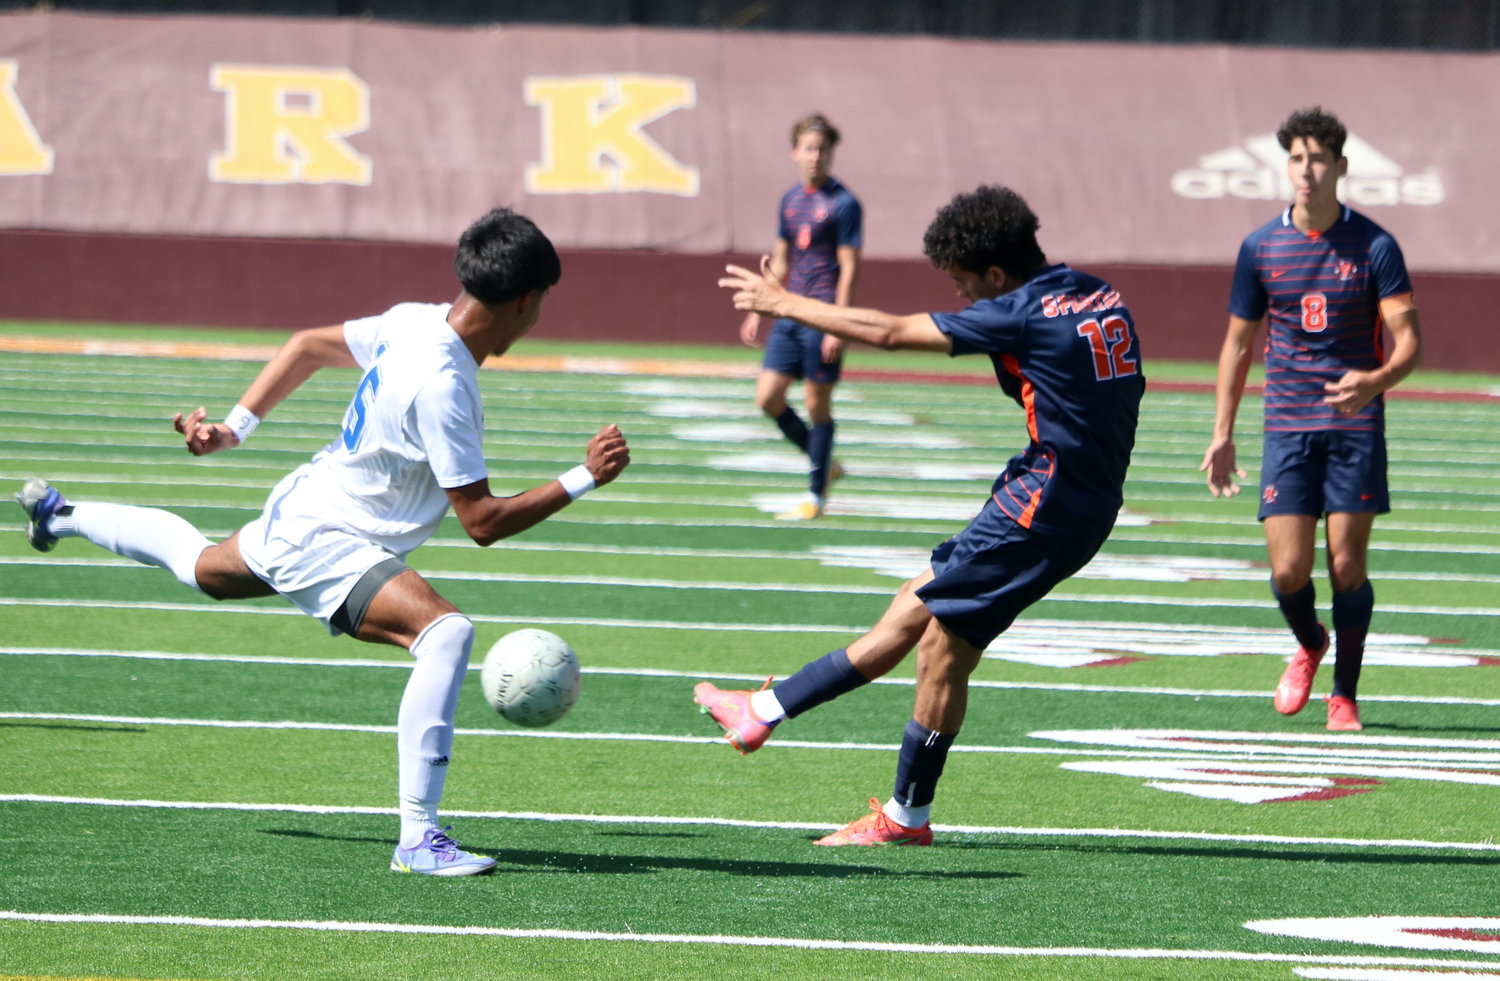 Abdullah Soliman crosses the ball during Saturday’s Class 6A Region III Final between Seven Lakes and Cy-Creek in Deer Park.